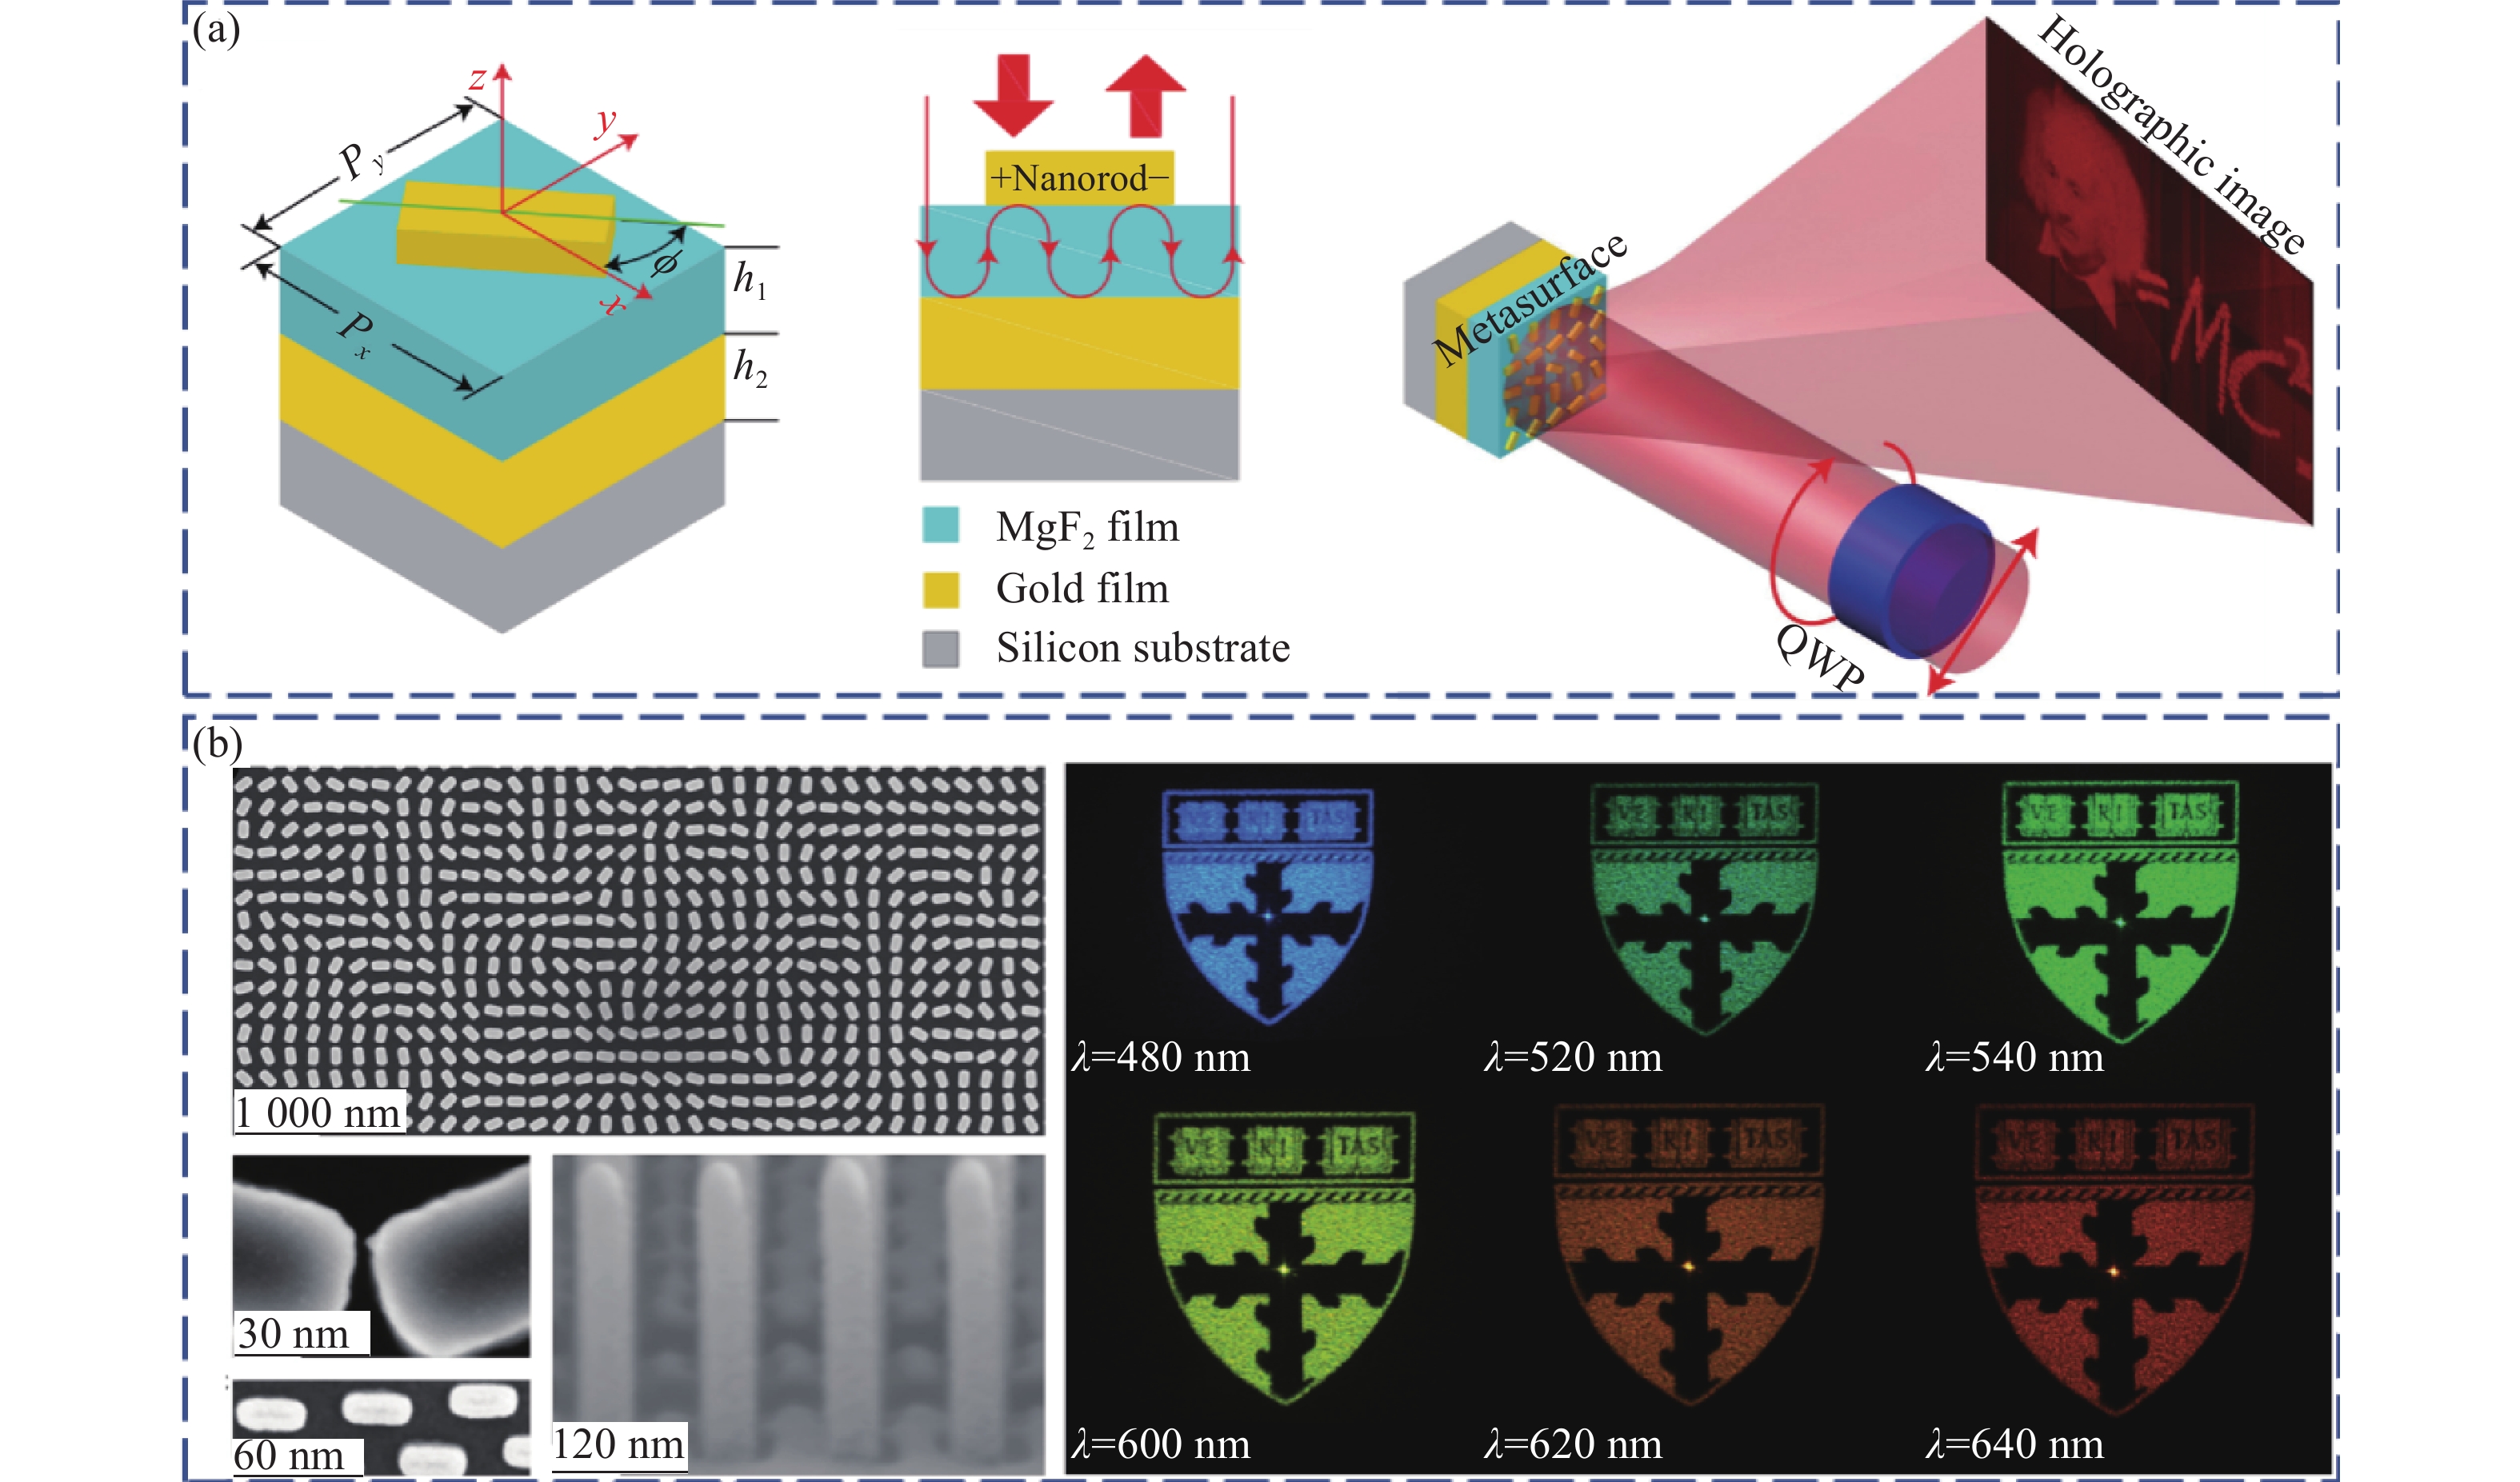 High efficiency holography enabled with geometric metasurfaces[41-42]. (a) Based on MIM structures; (b) Based on TiO2 nanobricks